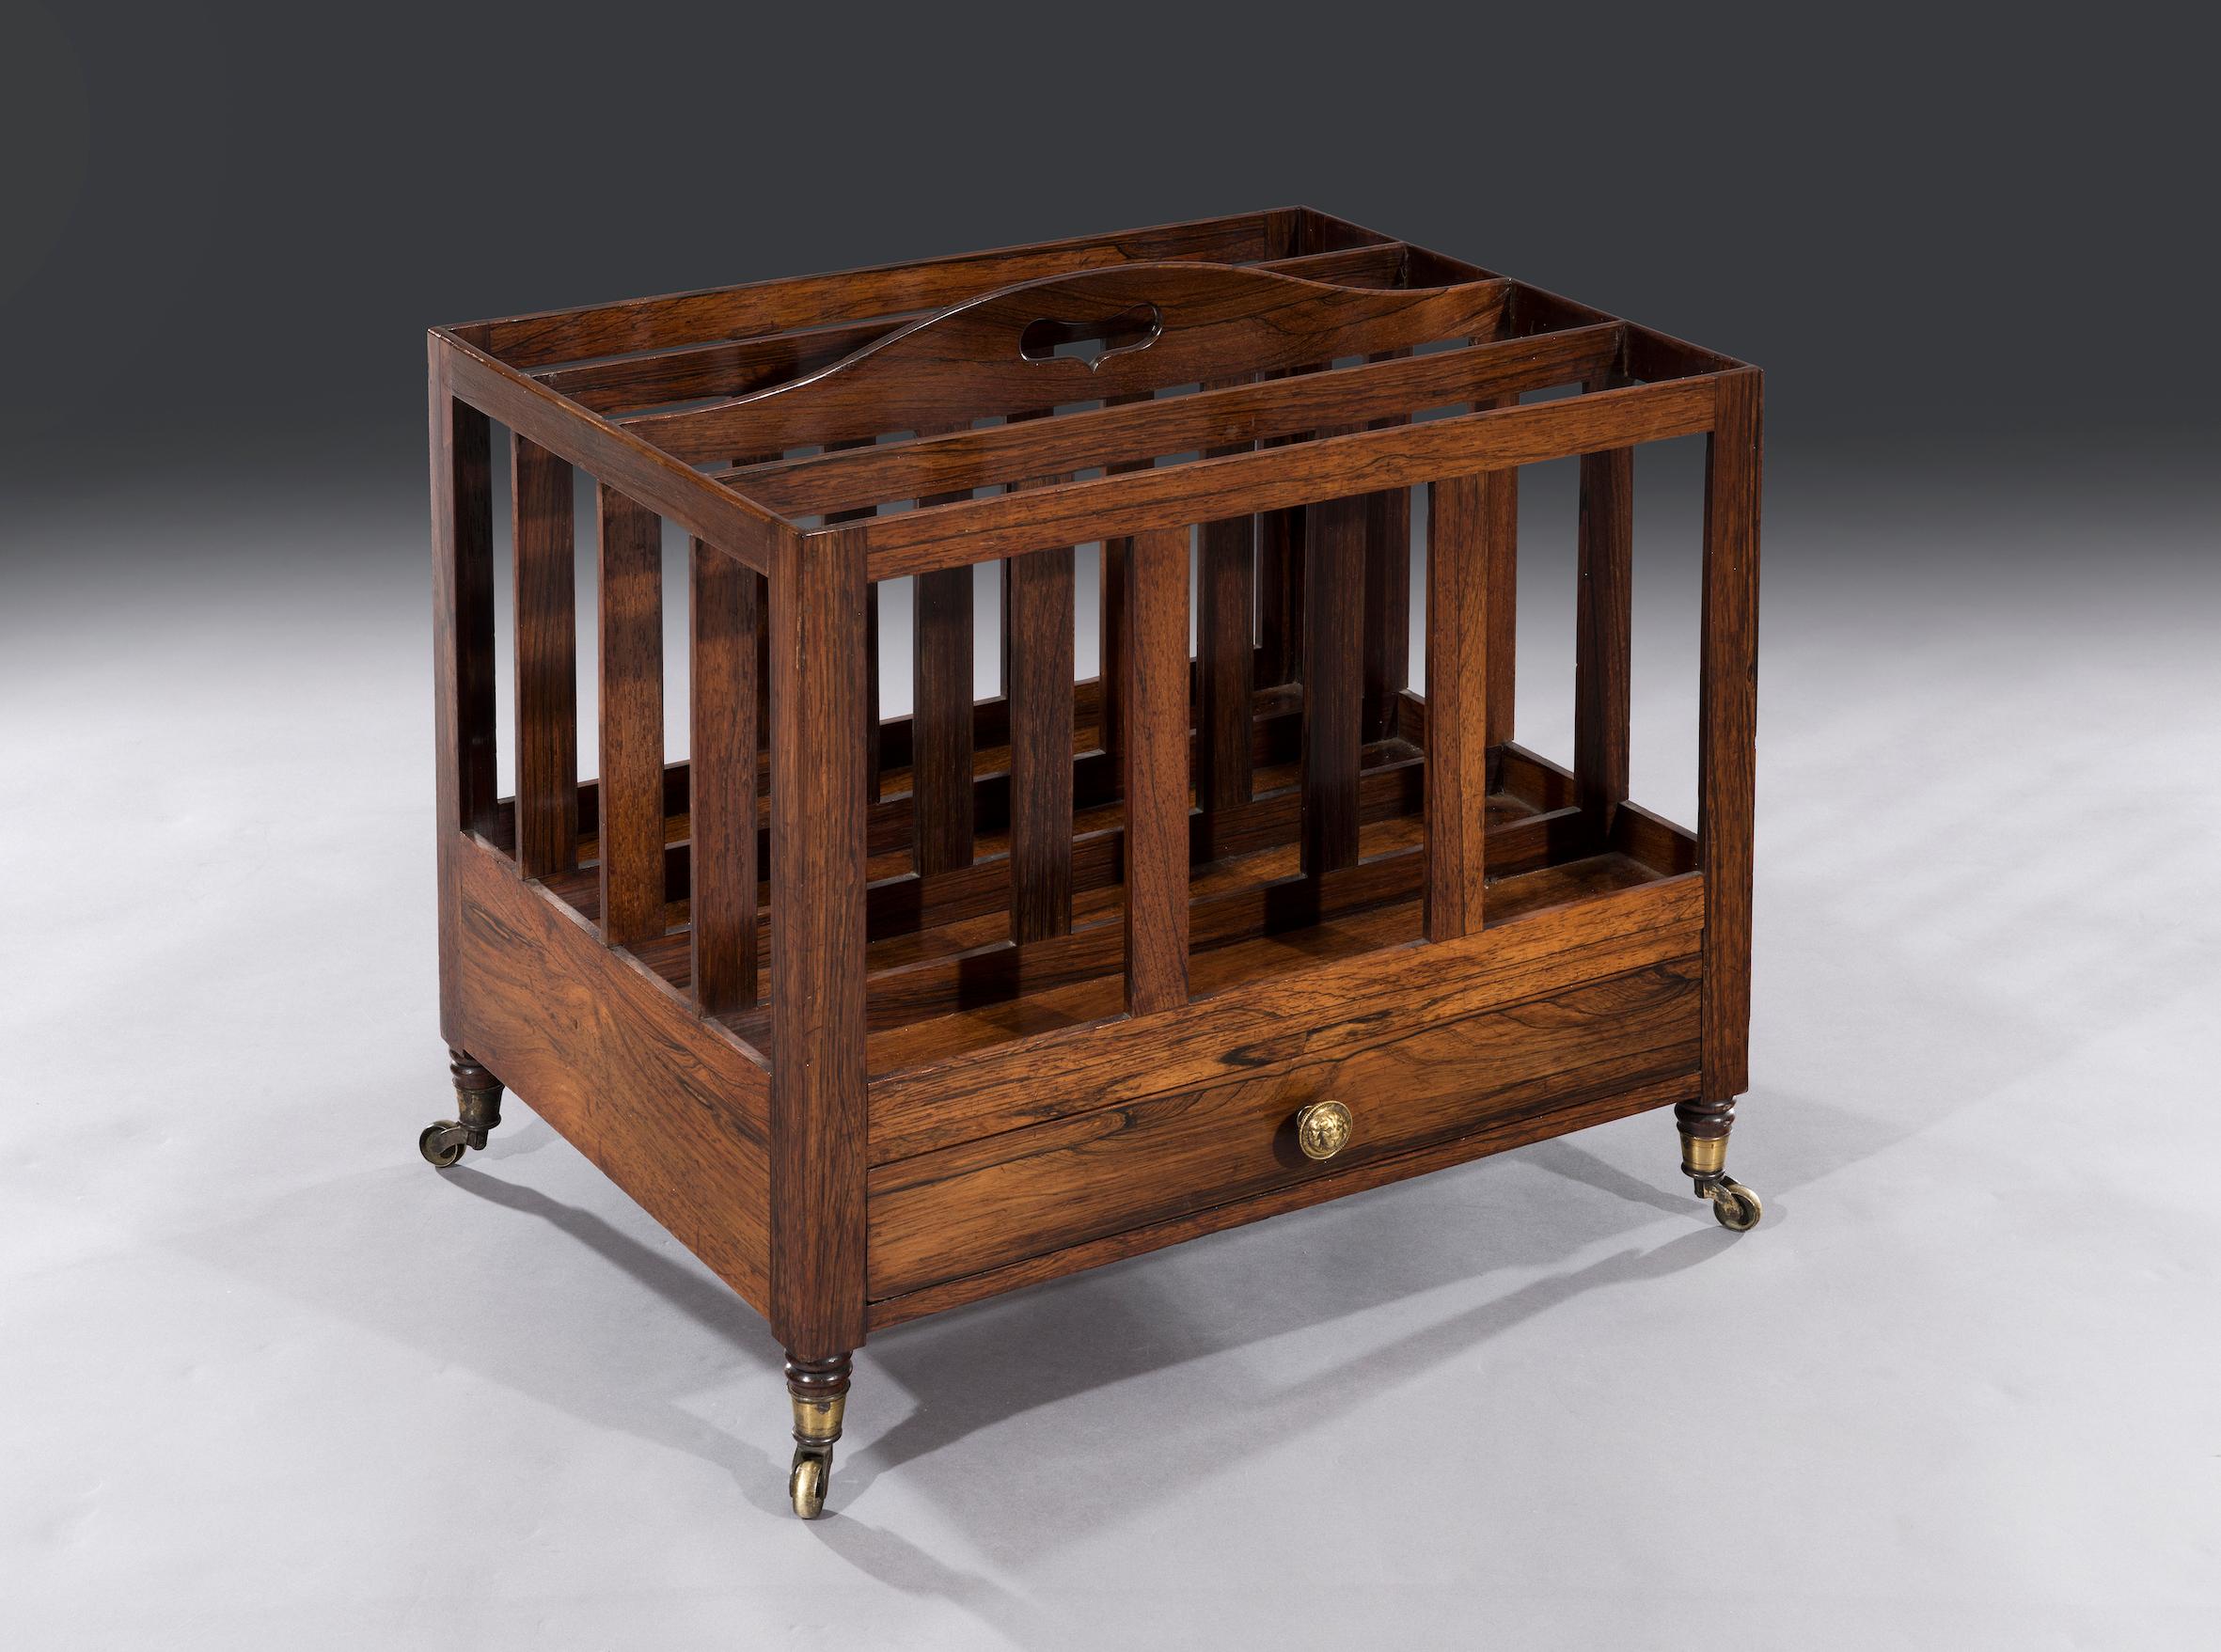 The Regency rosewood Canterbury has four divisions and a carved carrying handle with solid rosewood uprights, above a full length mahogany lined drawer. The Canterbury stands on its original castors.